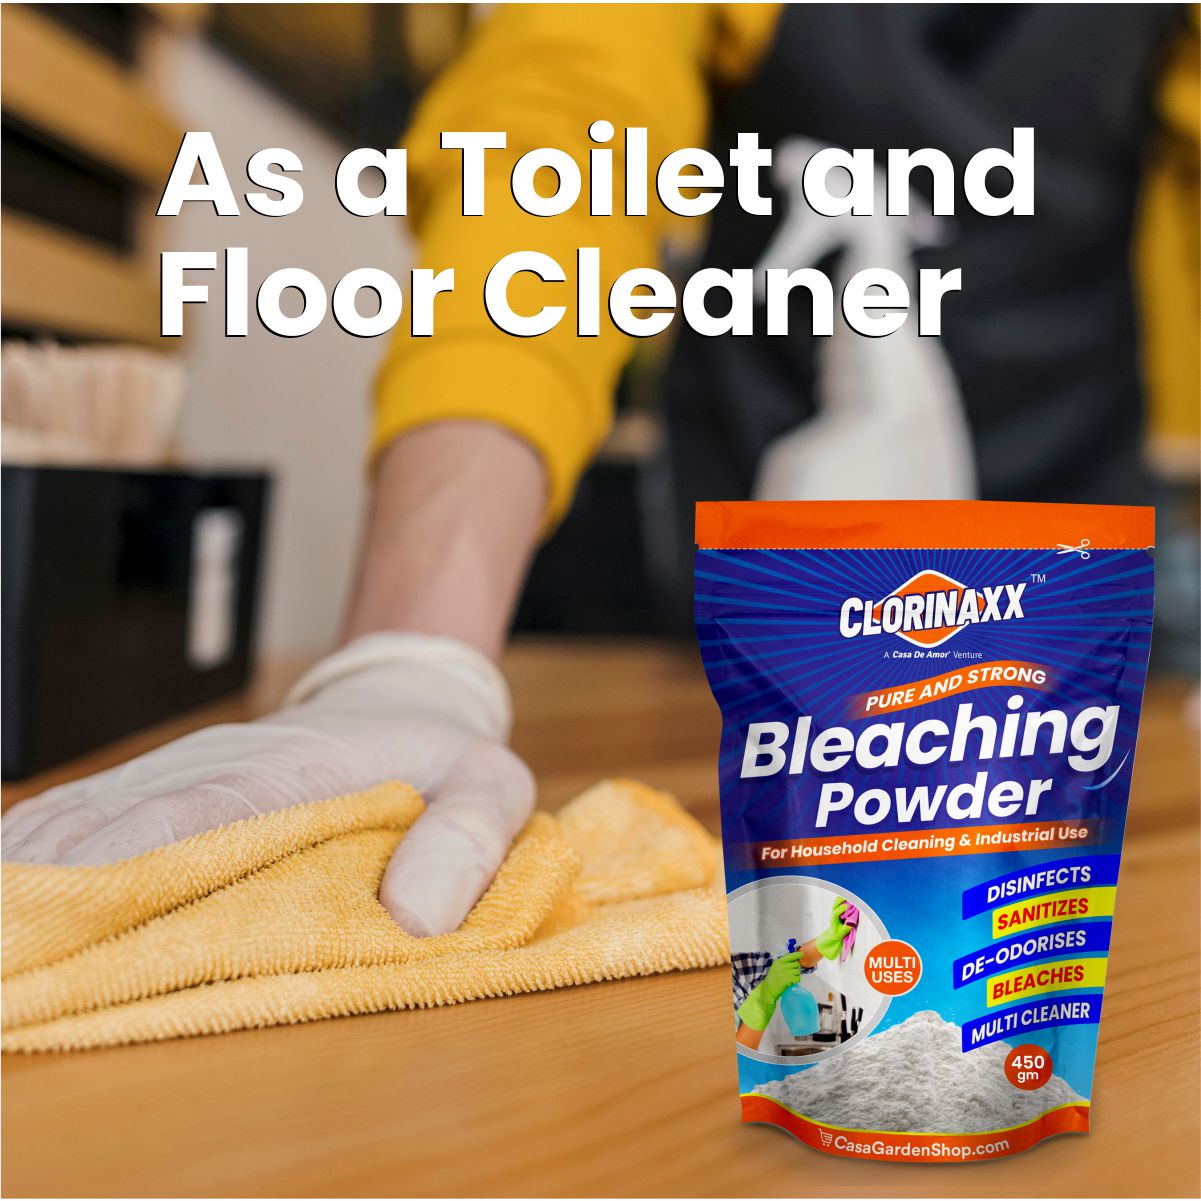 Clorinaxx Bleaching Powder For Household & Kitchen Cleaning, Disinfectant Spray to Kill Fungus, Germs, Bacteria, Floor Cleaner, Toilet Cleaner, Overhead Tank Cleaner and Multi Uses